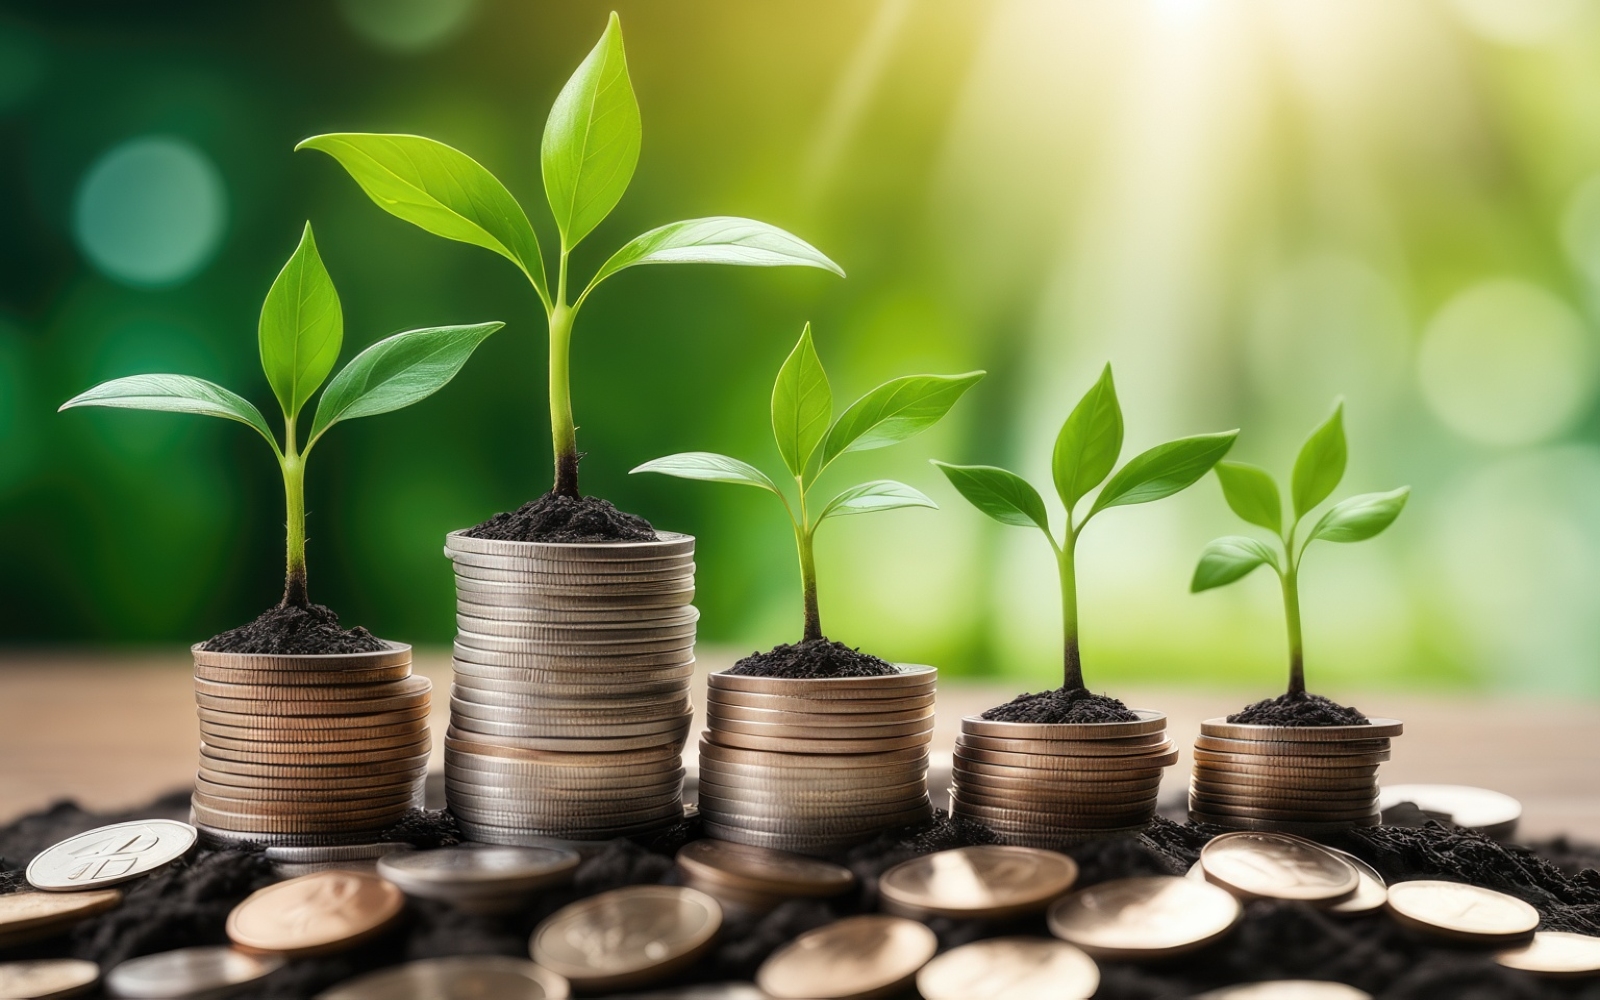 Premium Business Growing Plants on Coins Stacked on Green Blurred Background 22